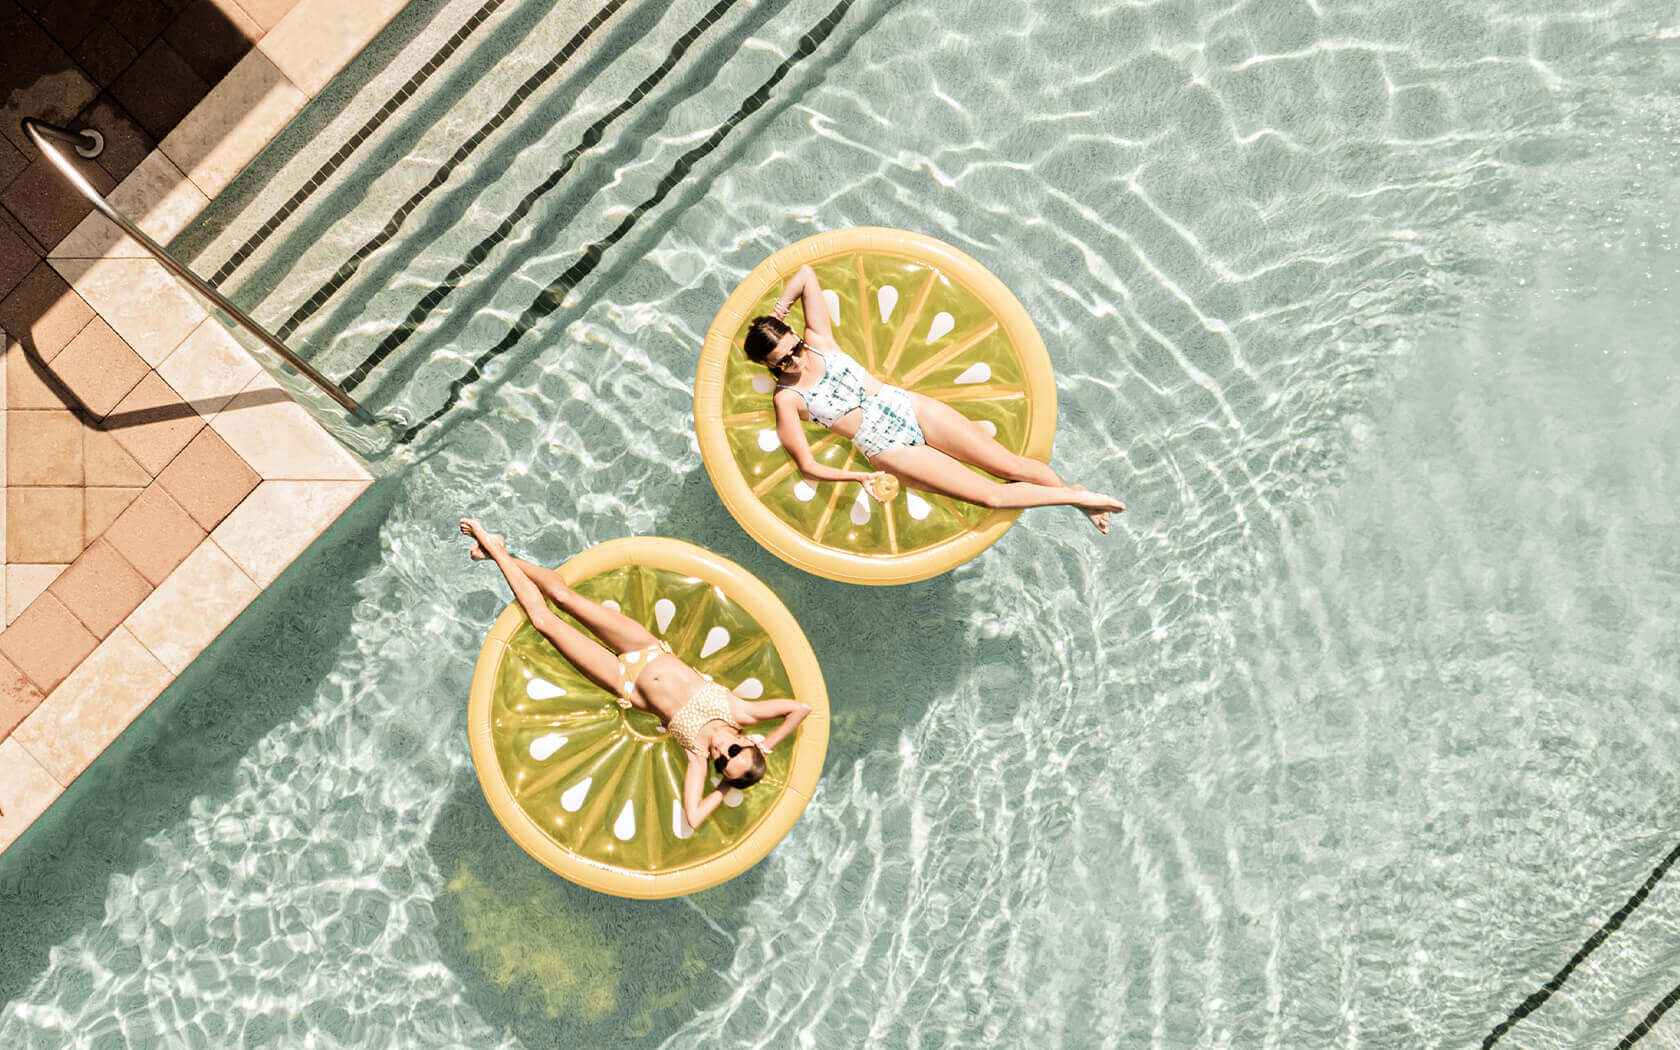 two ladies floating on two lemon-looking floats at the pool